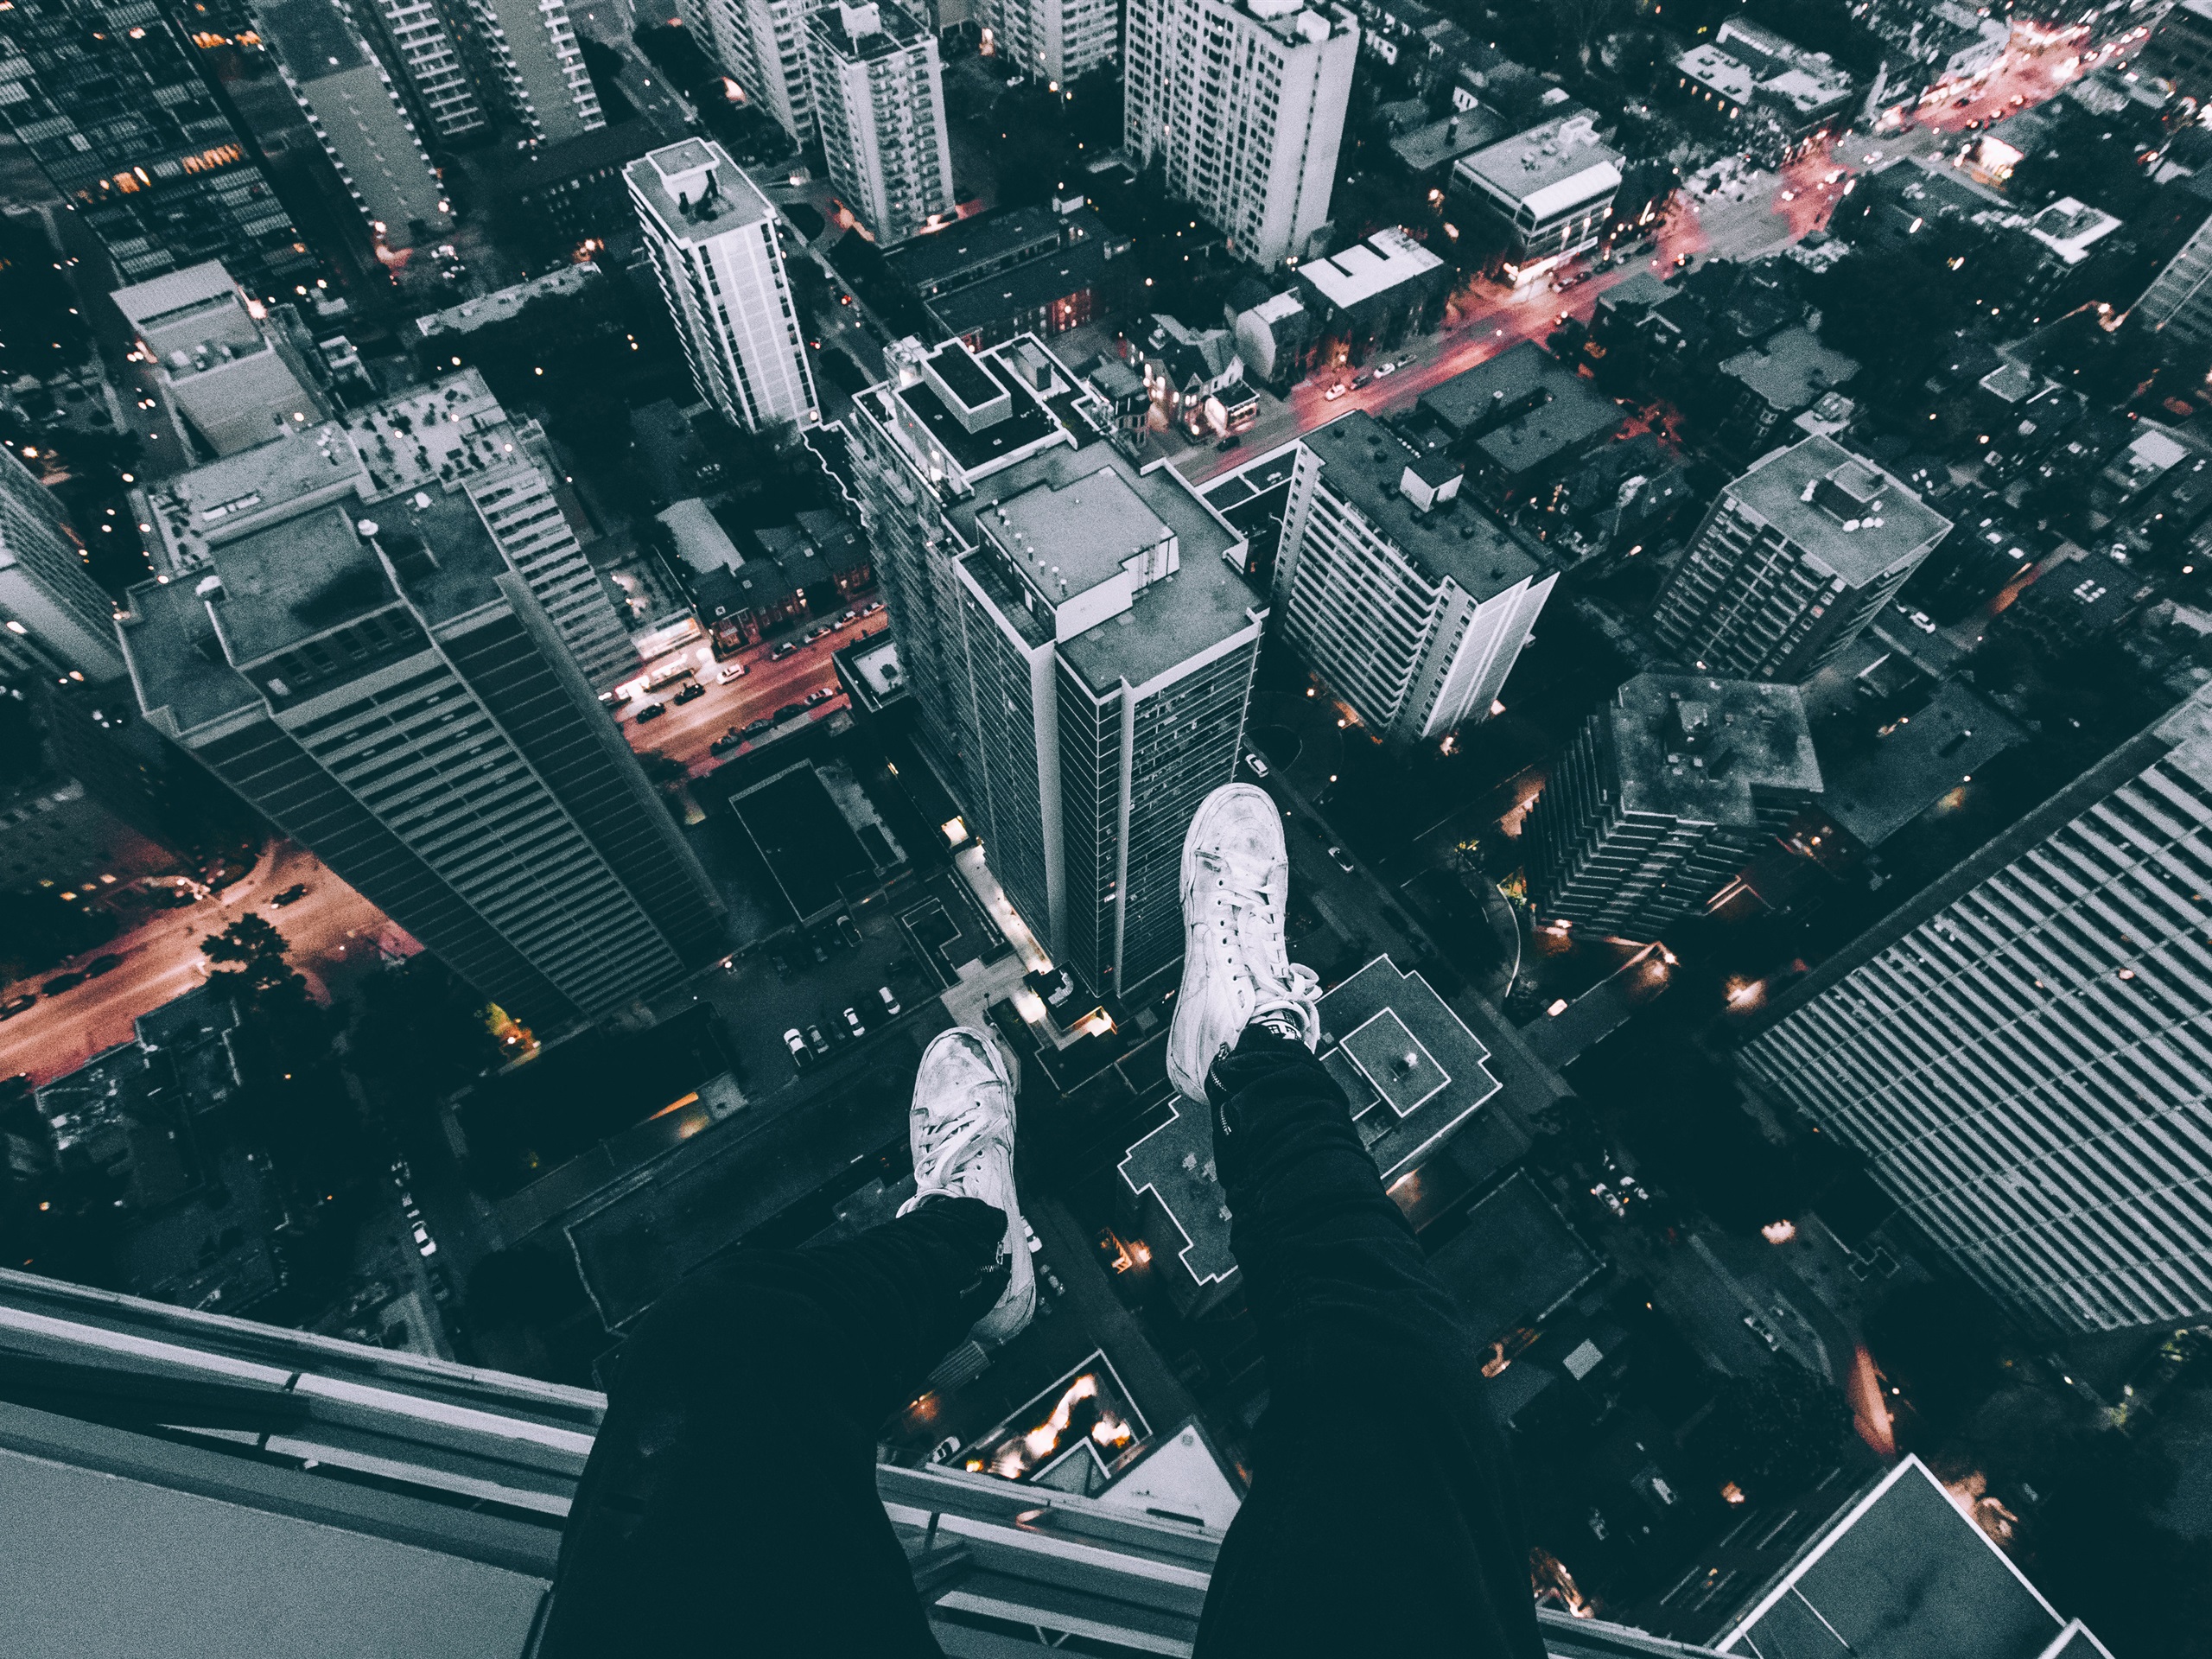 Wallpaper City, skyscrapers, roof, legs, shoes, dusk 3840x2160 UHD 4K Picture, Image